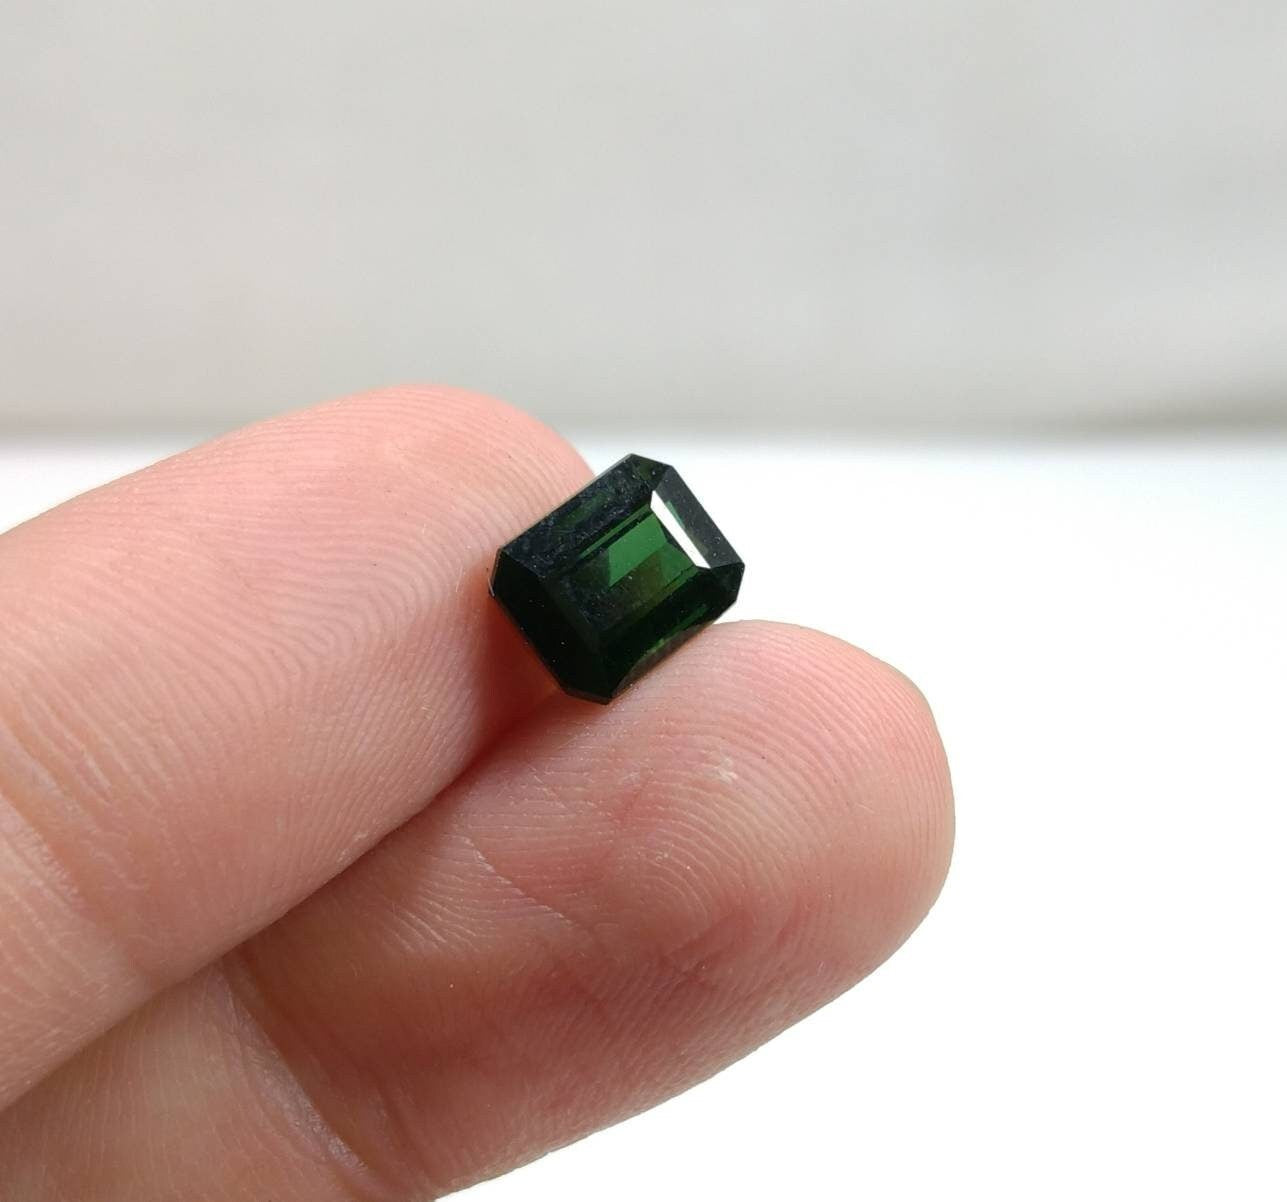 ARSAA GEMS AND MINERALSNatural high quality beautiful 3 carats faceted radiant shape green tourmaline gem - Premium  from ARSAA GEMS AND MINERALS - Just $60.00! Shop now at ARSAA GEMS AND MINERALS